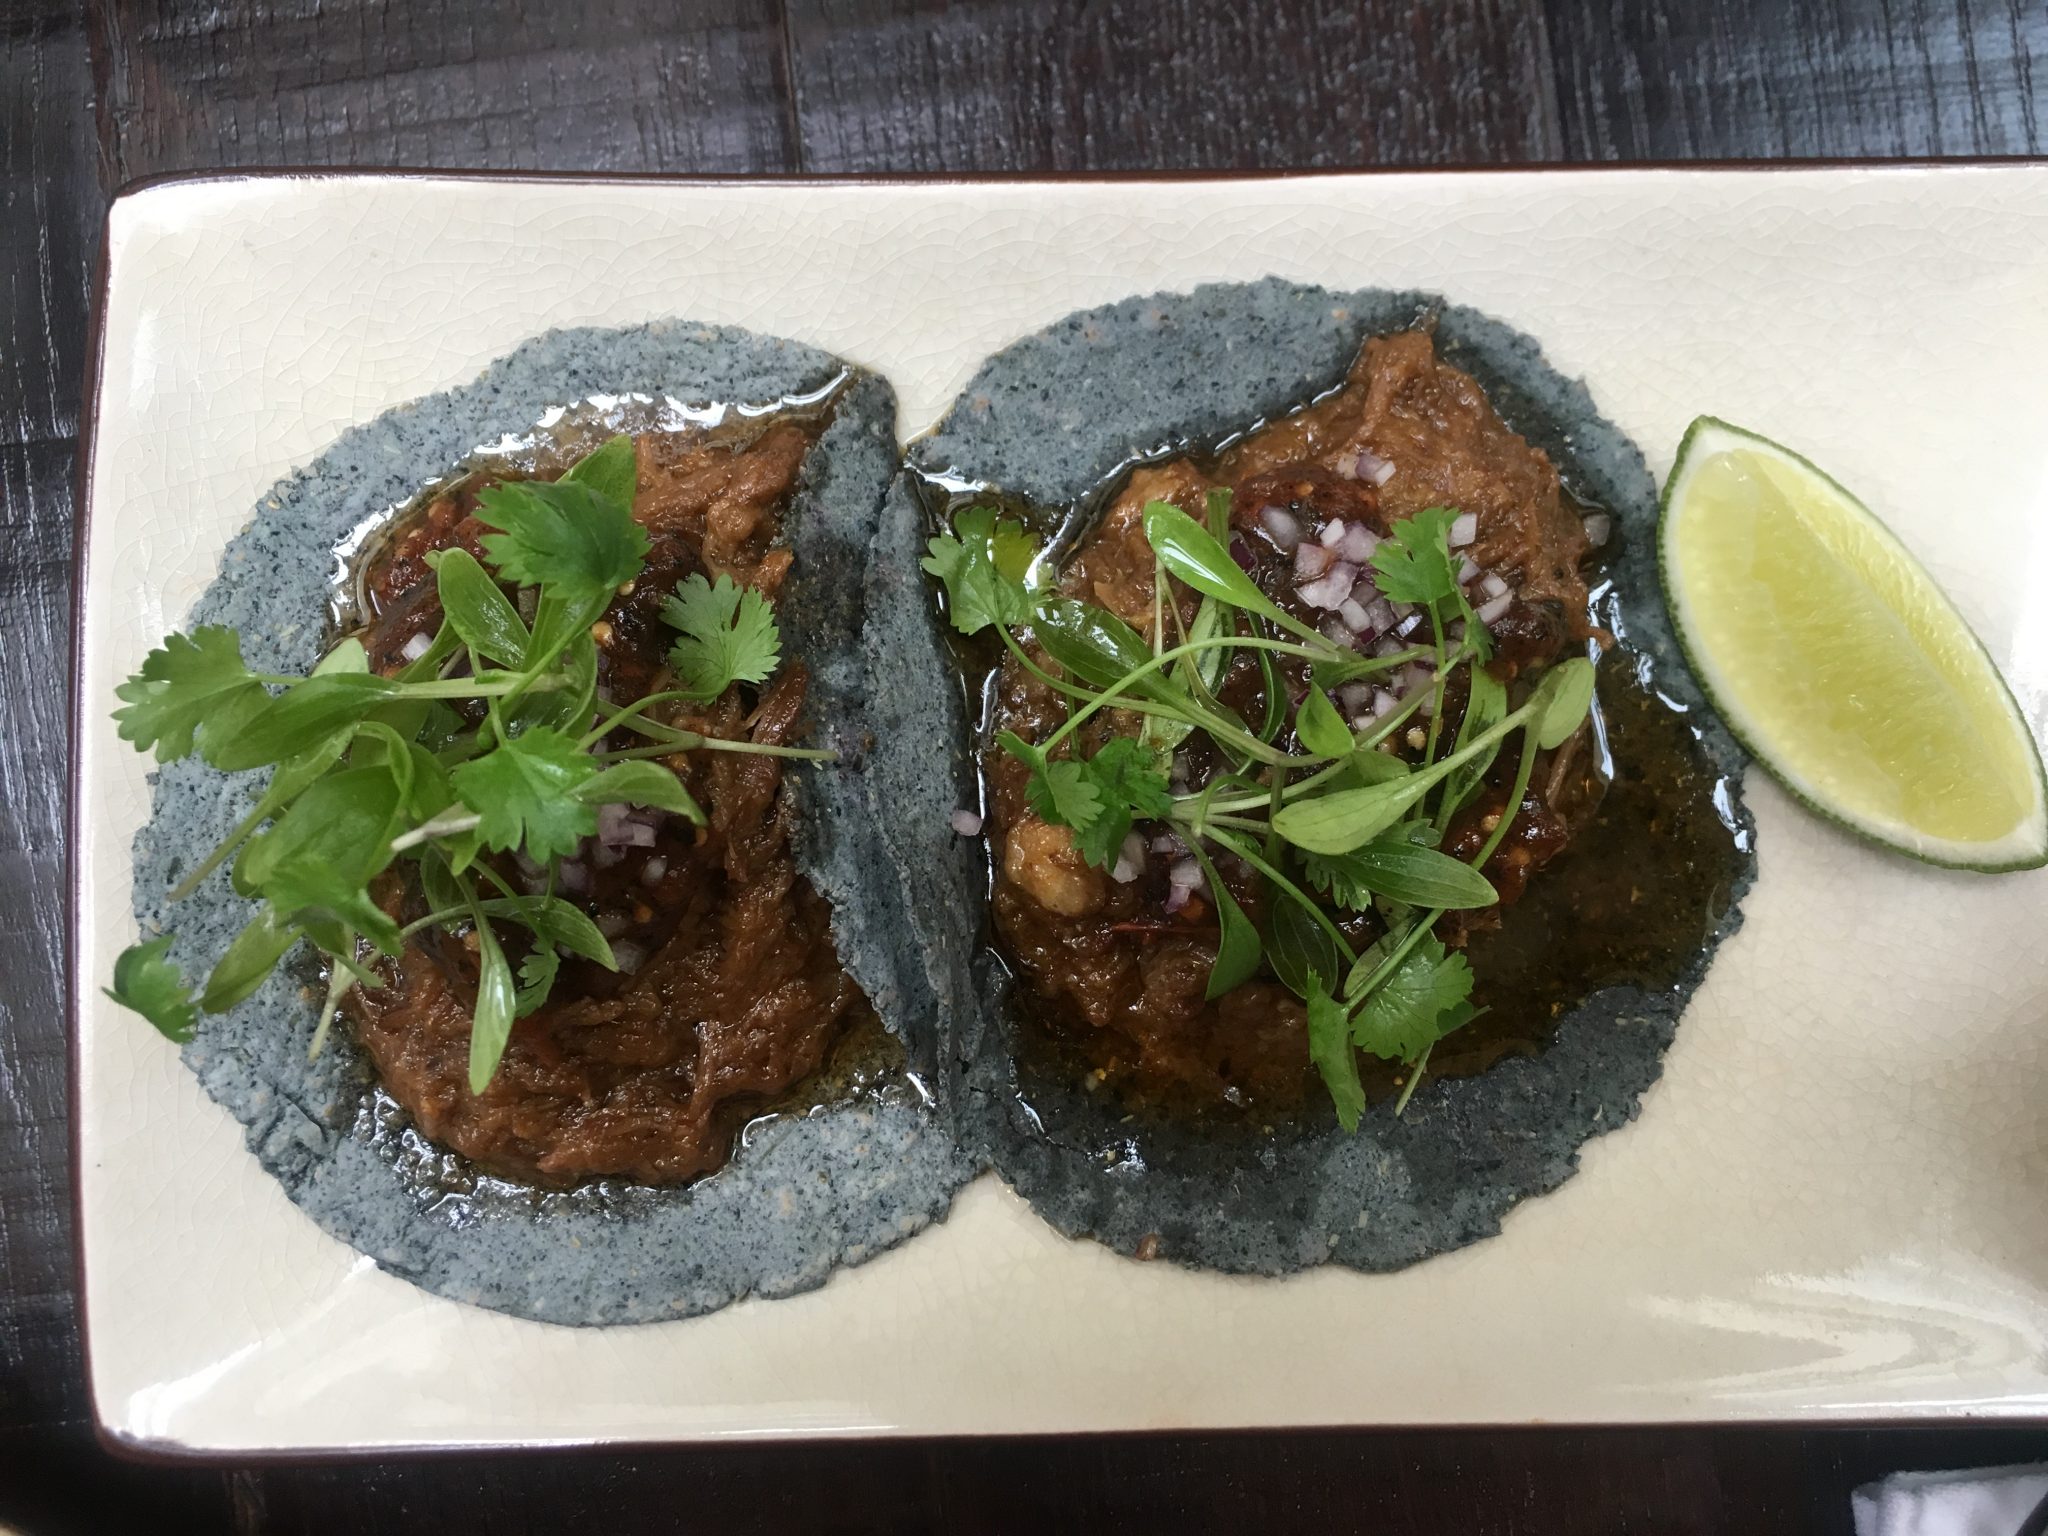 Reviewing: Peyotito Restaurant in Notting Hill